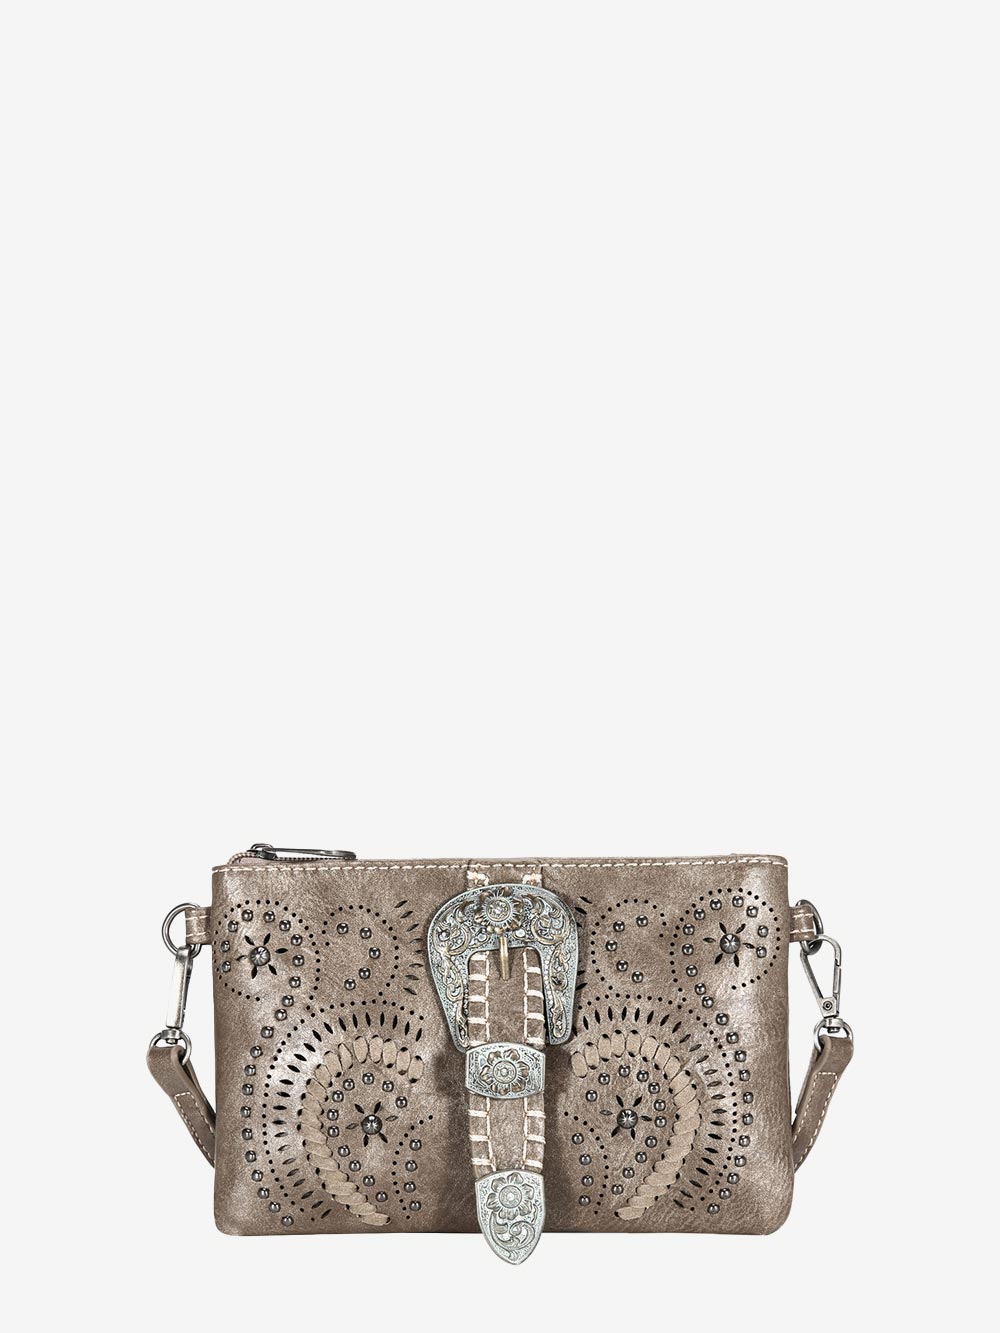 Montana West Antique Silver Floral Buckle Whipstitch Crossbody Clutch - Montana West World